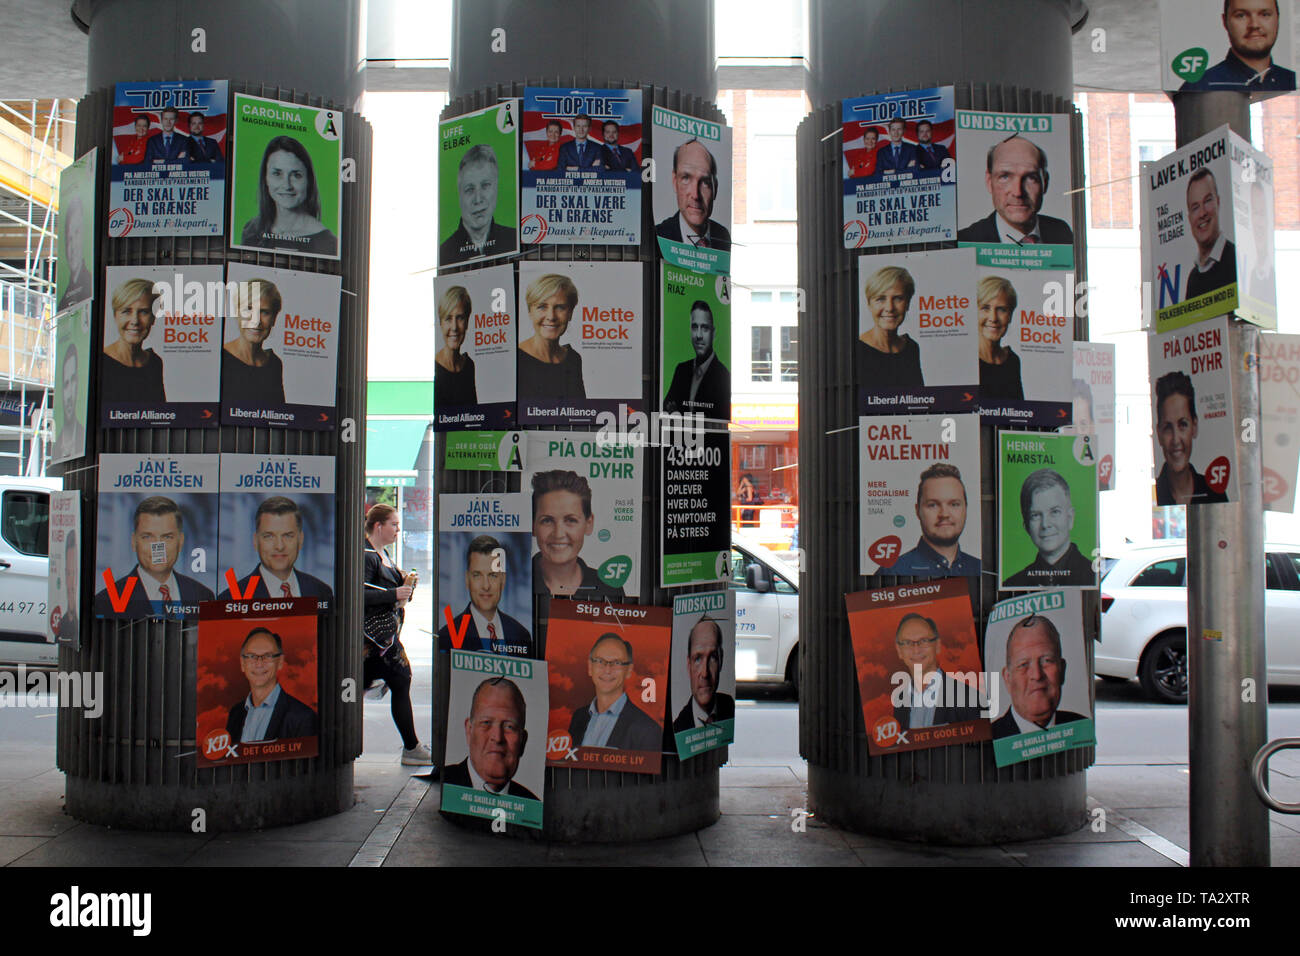 Election posters promoting candidates for 2019 Danish general election, Copenhagen, Denmark Stock Photo